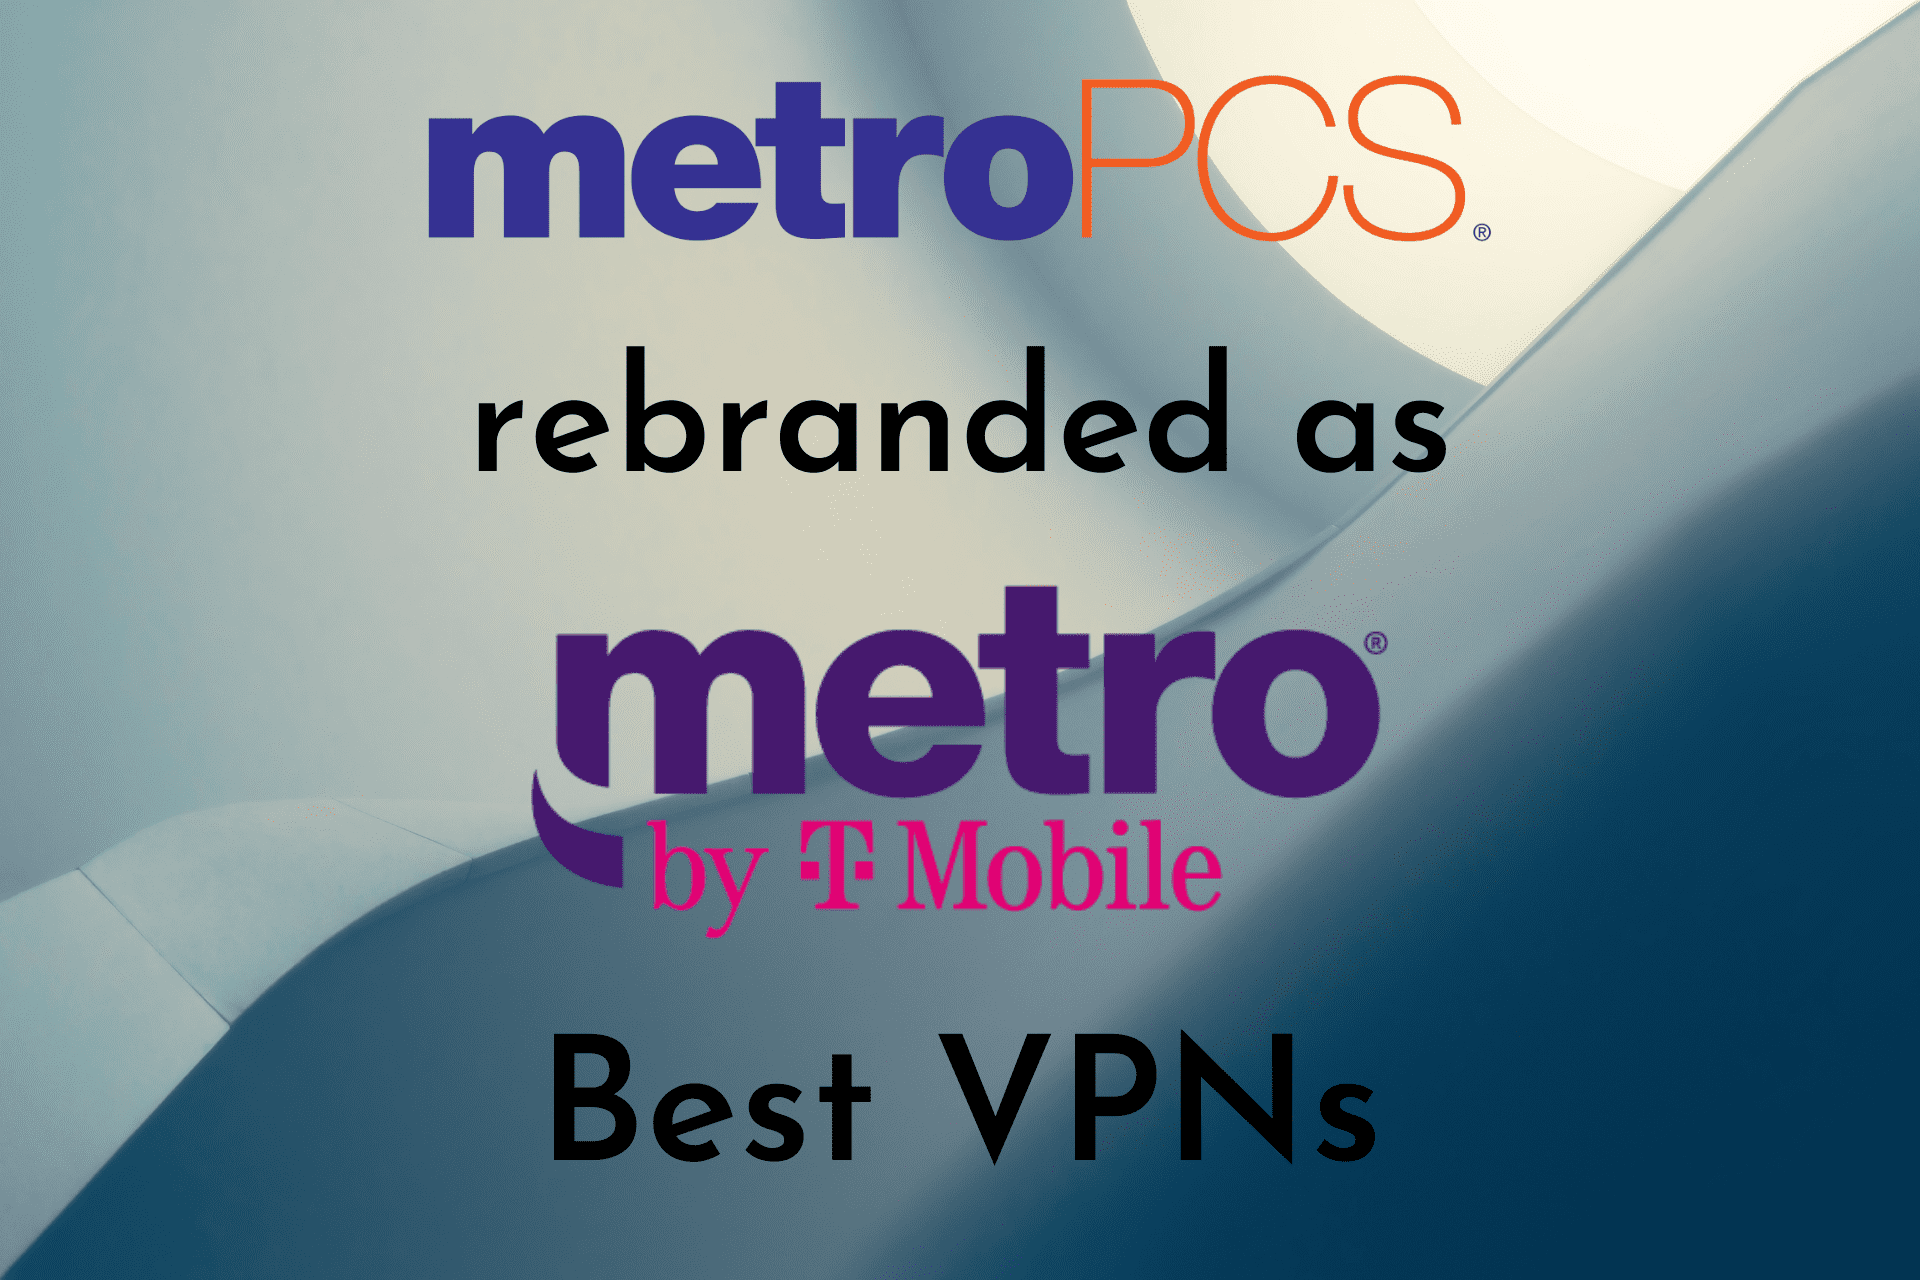 5 best VPNs for MetroPCS [Metro by T-Mobile]